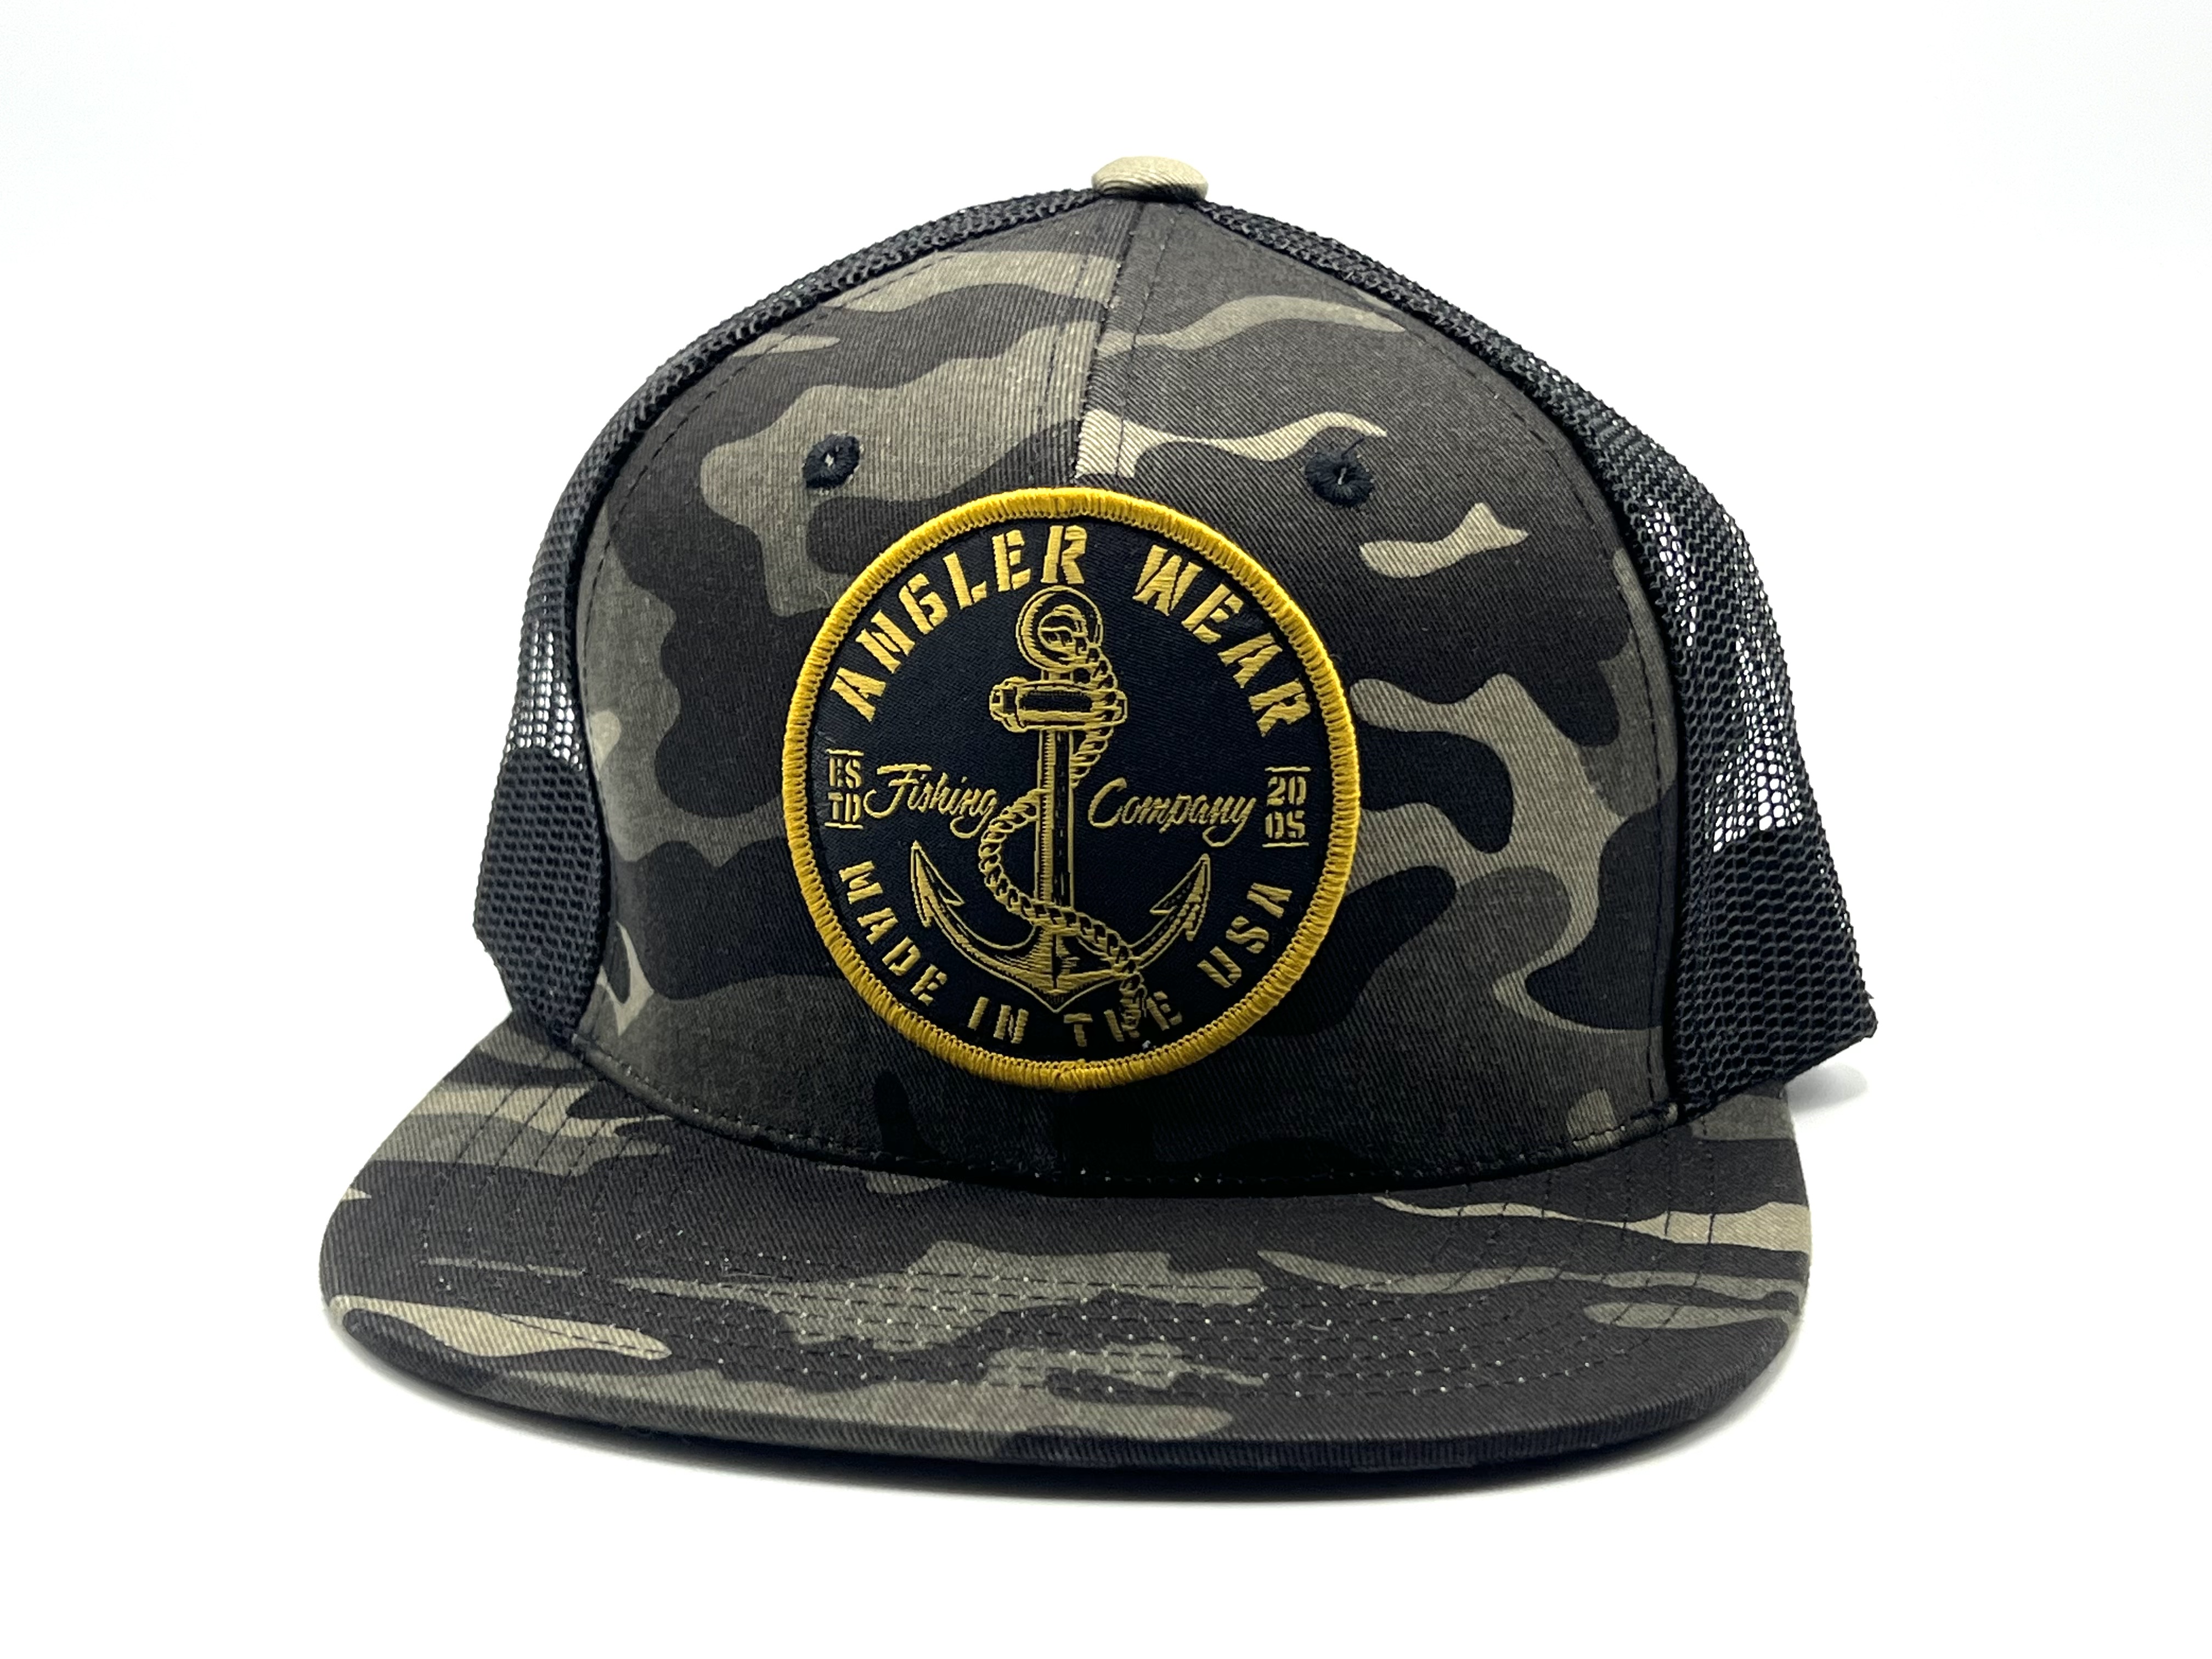 AW ANCHOR PATCH” HAT – ANGLER WEAR